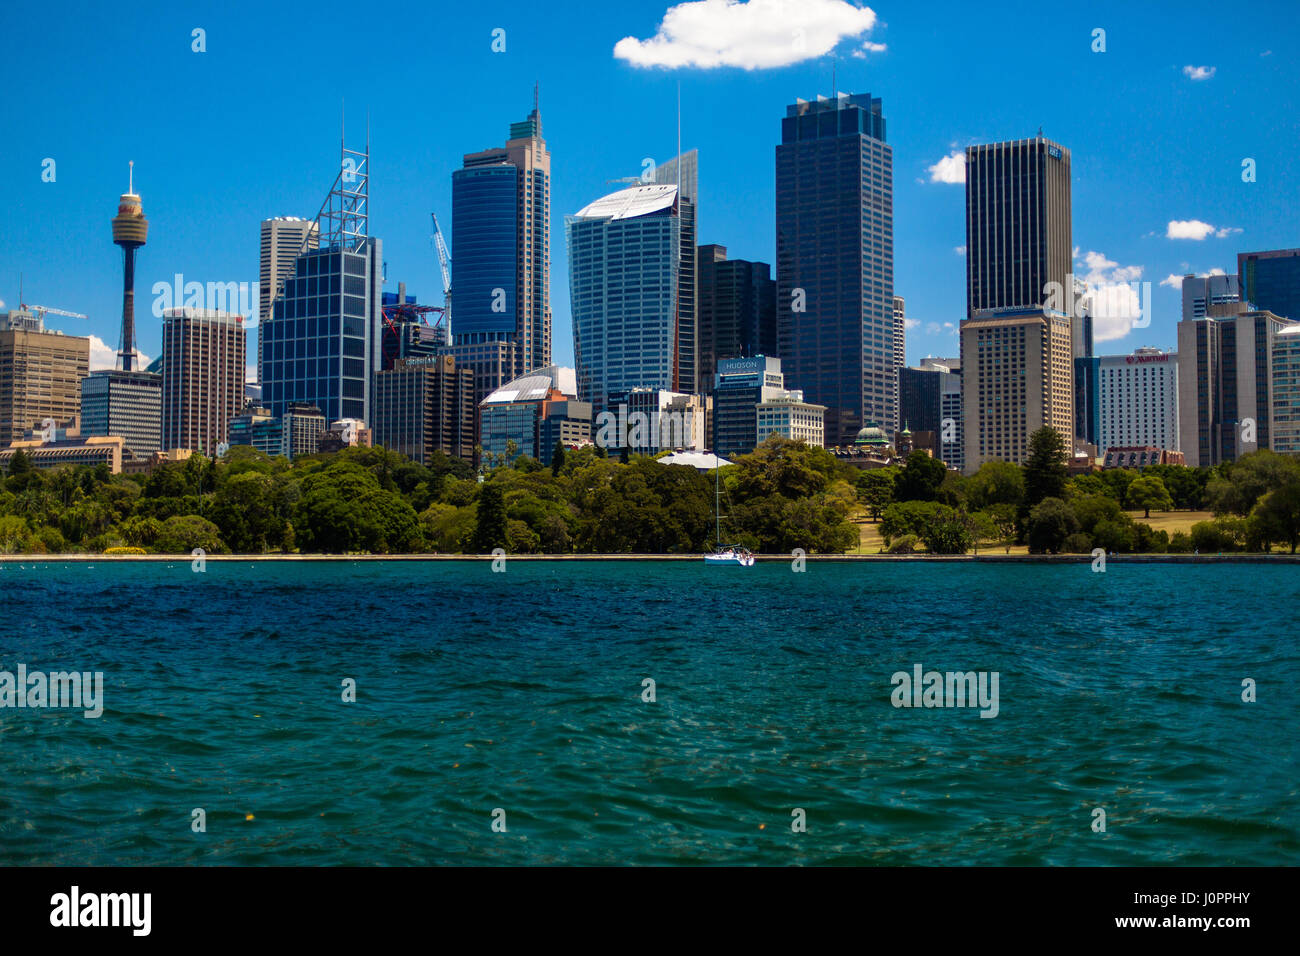 The view of the CBD of Sydney from the eastern suburbs, Sydney, Australia Stock Photo